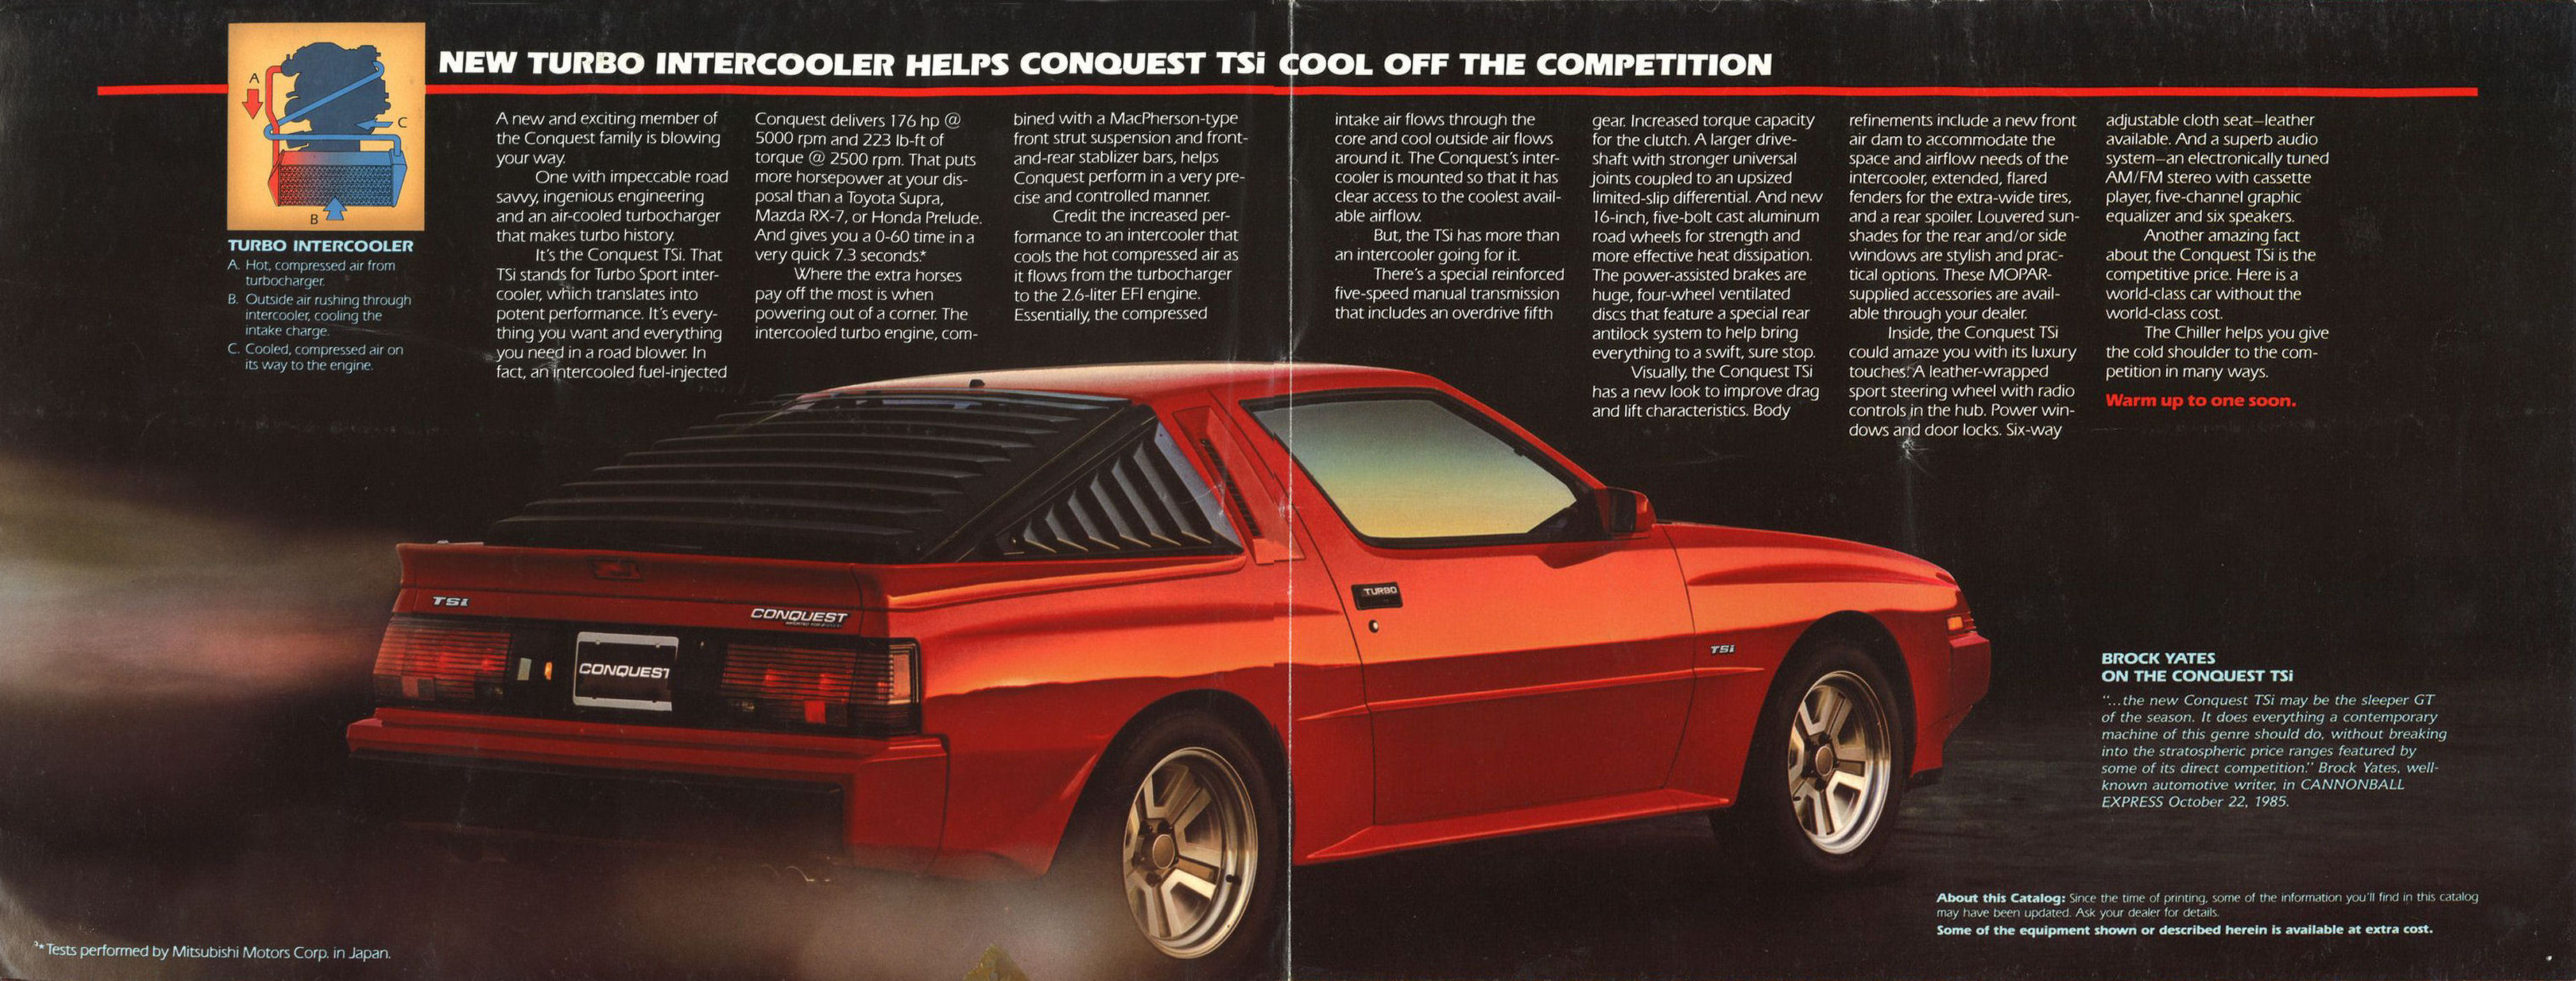 1986_Plymouth_Conquest_TSi_Foldout-02-03